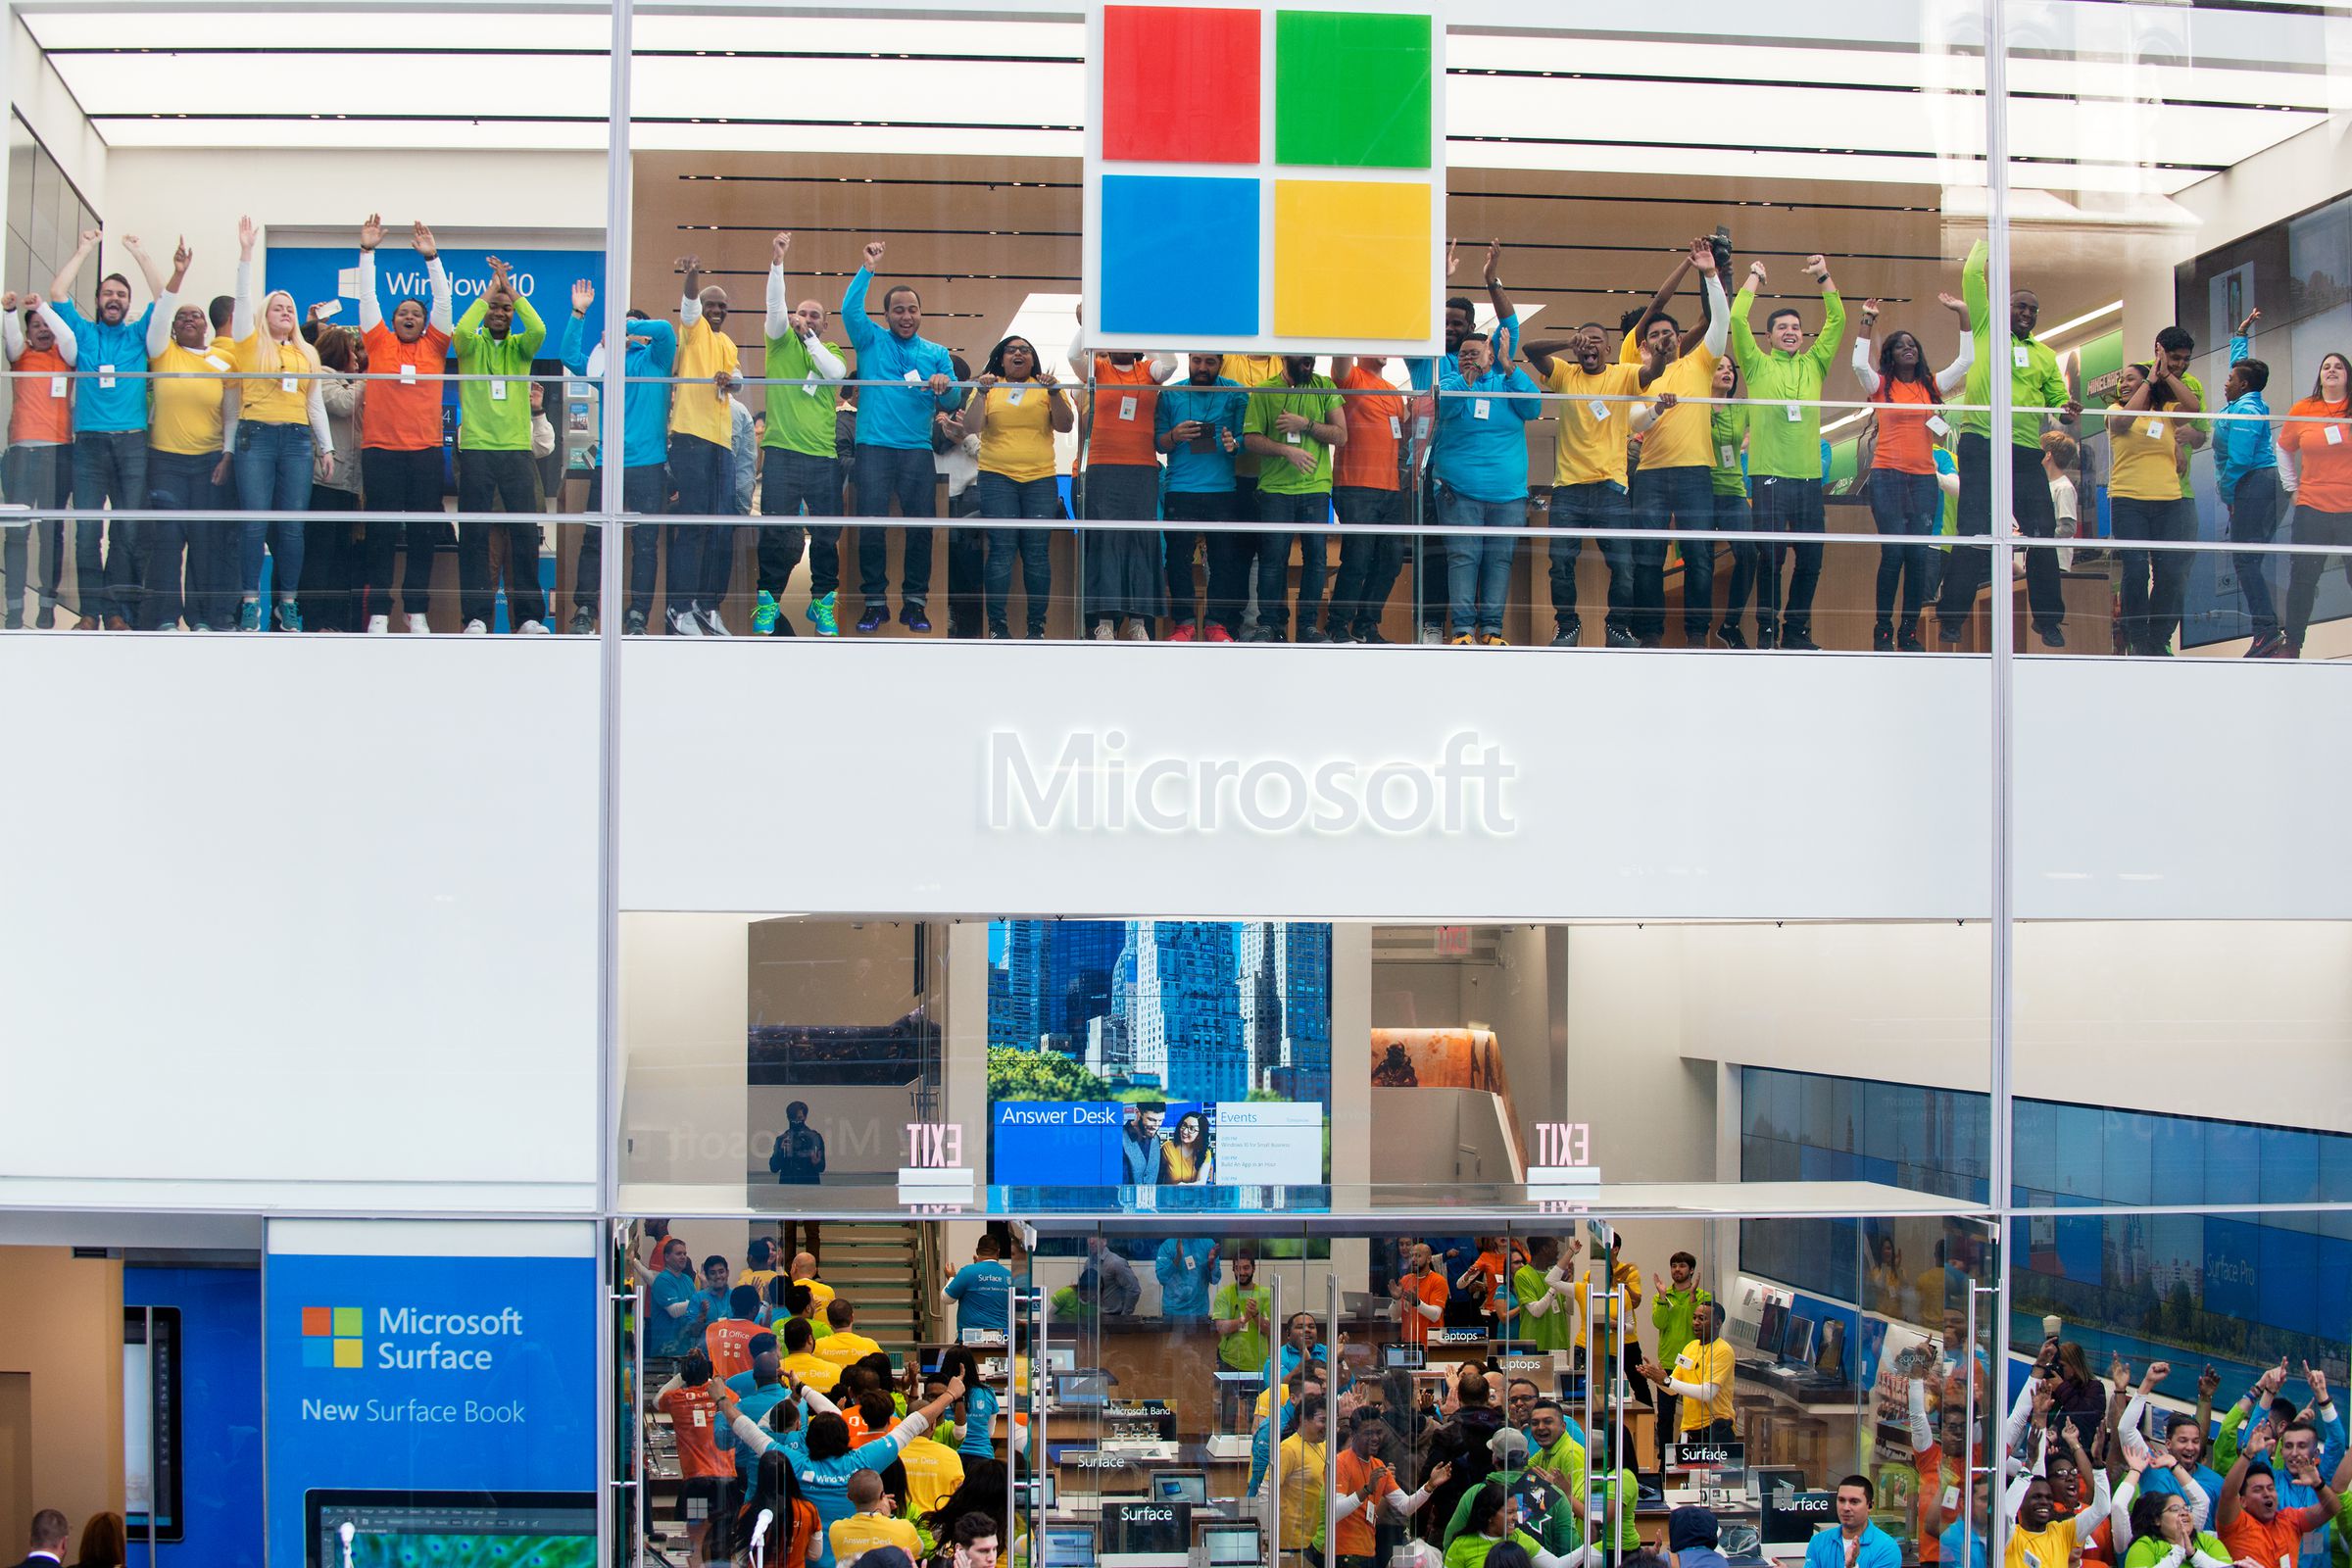 Microsoft Opens Flagship Store On New York’s Fifth Avenue